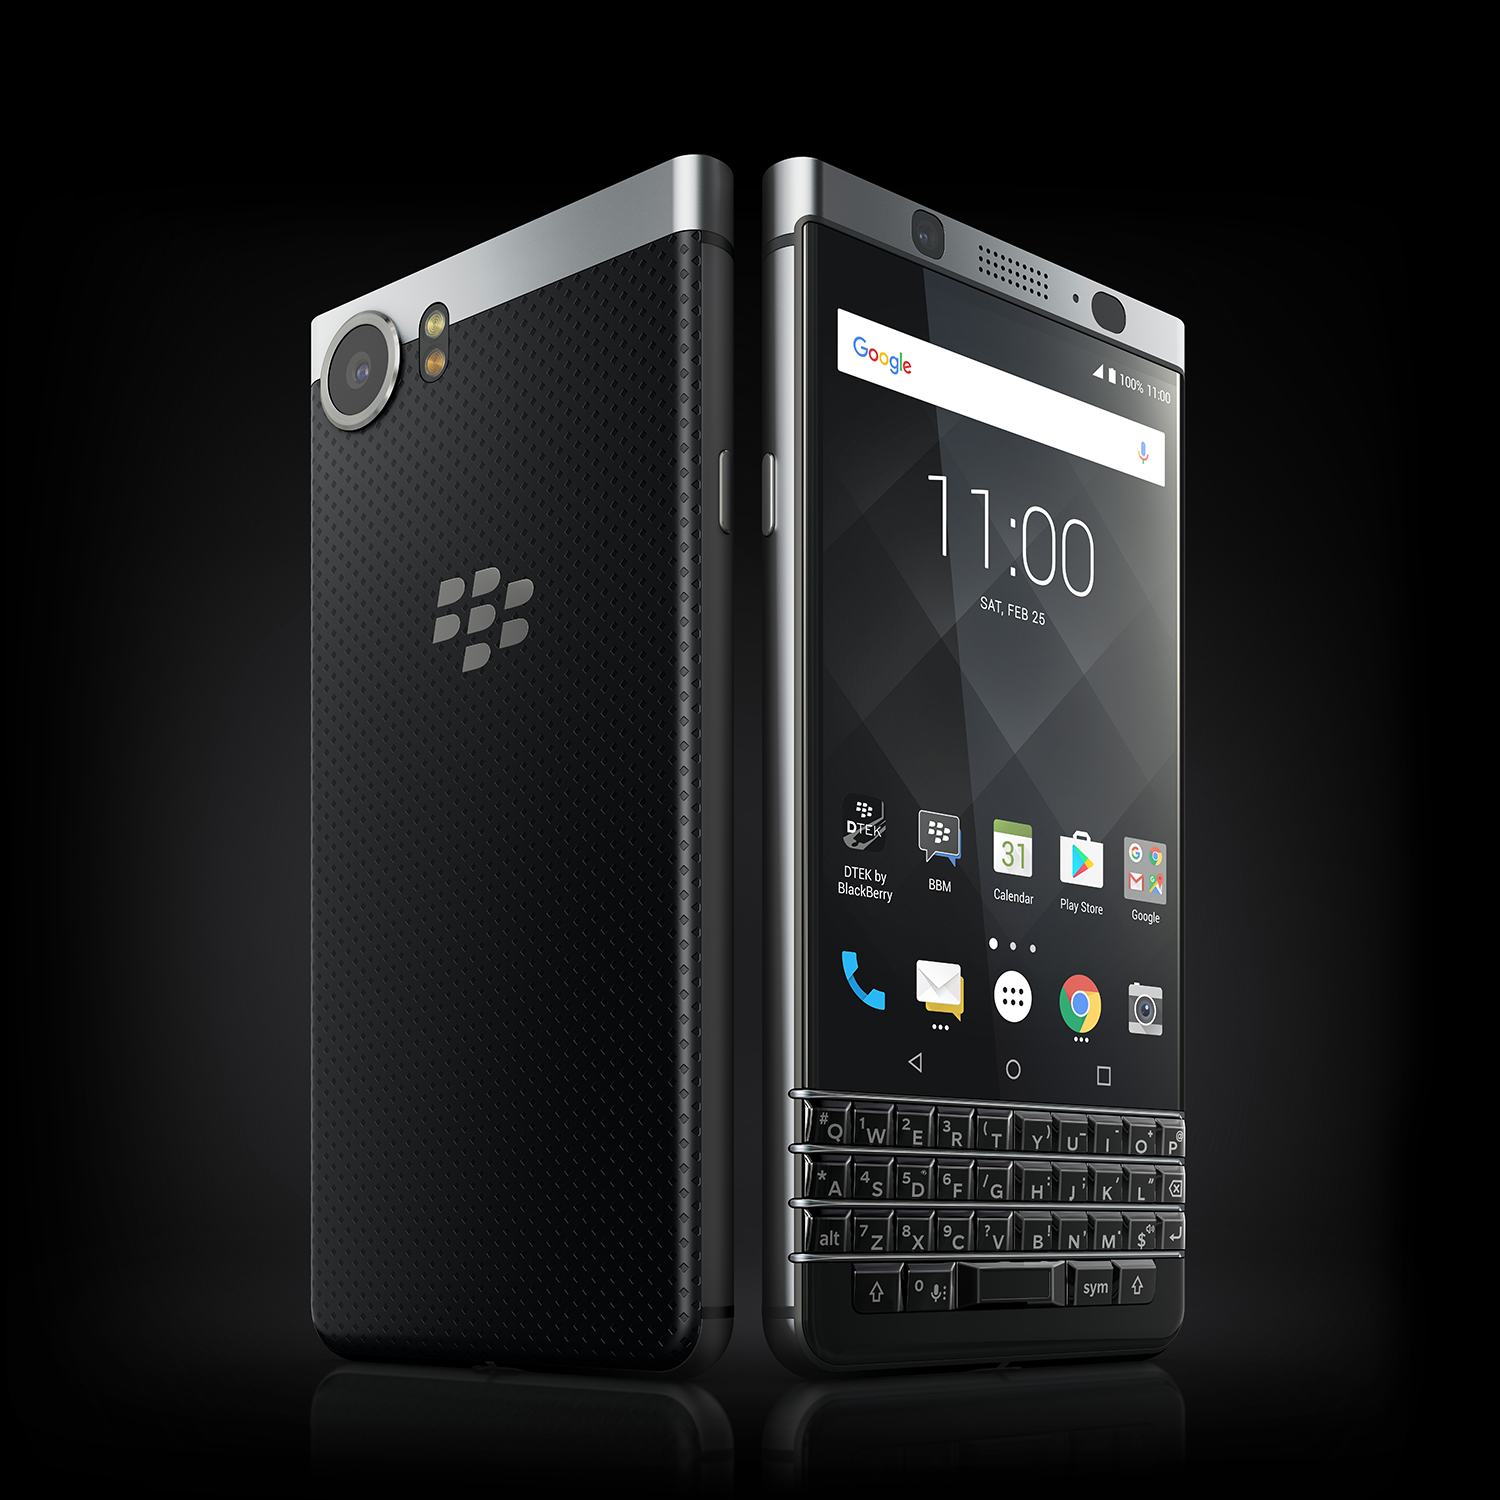 MWC 2017: BlackBerry KEYone Goes Official